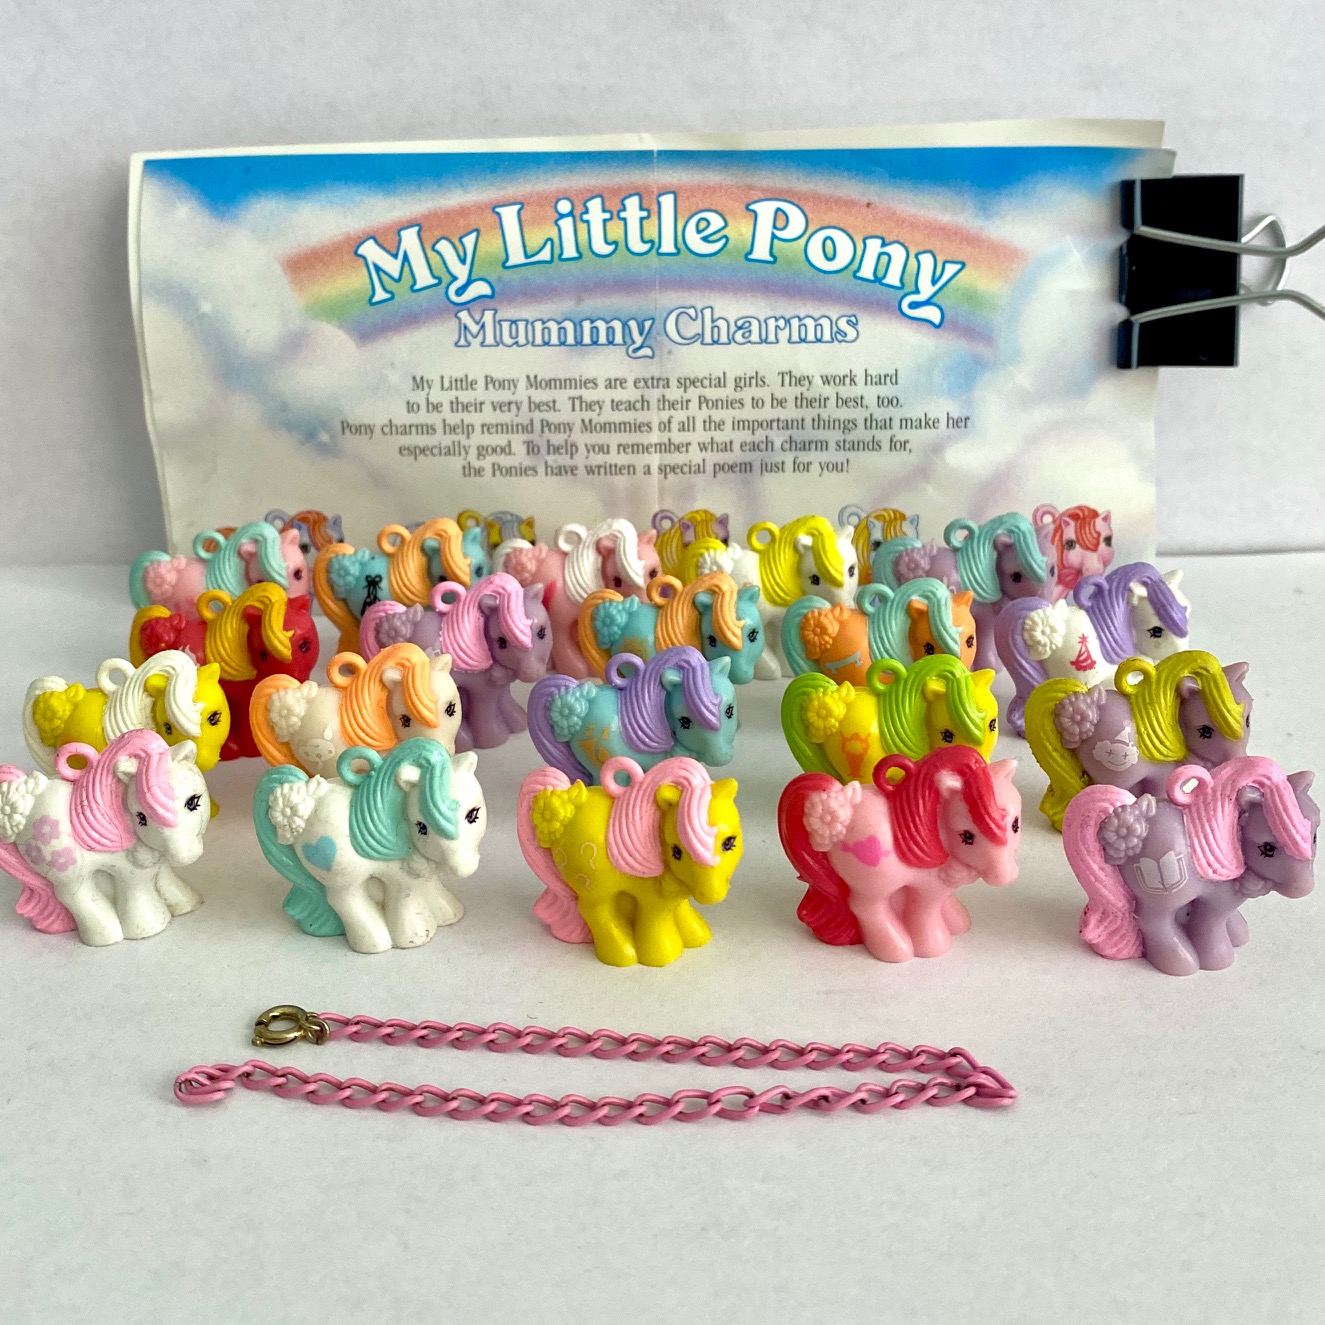 Vintage G1 MLP My Little Pony Baby Accessories Set Completers $3 Per Item